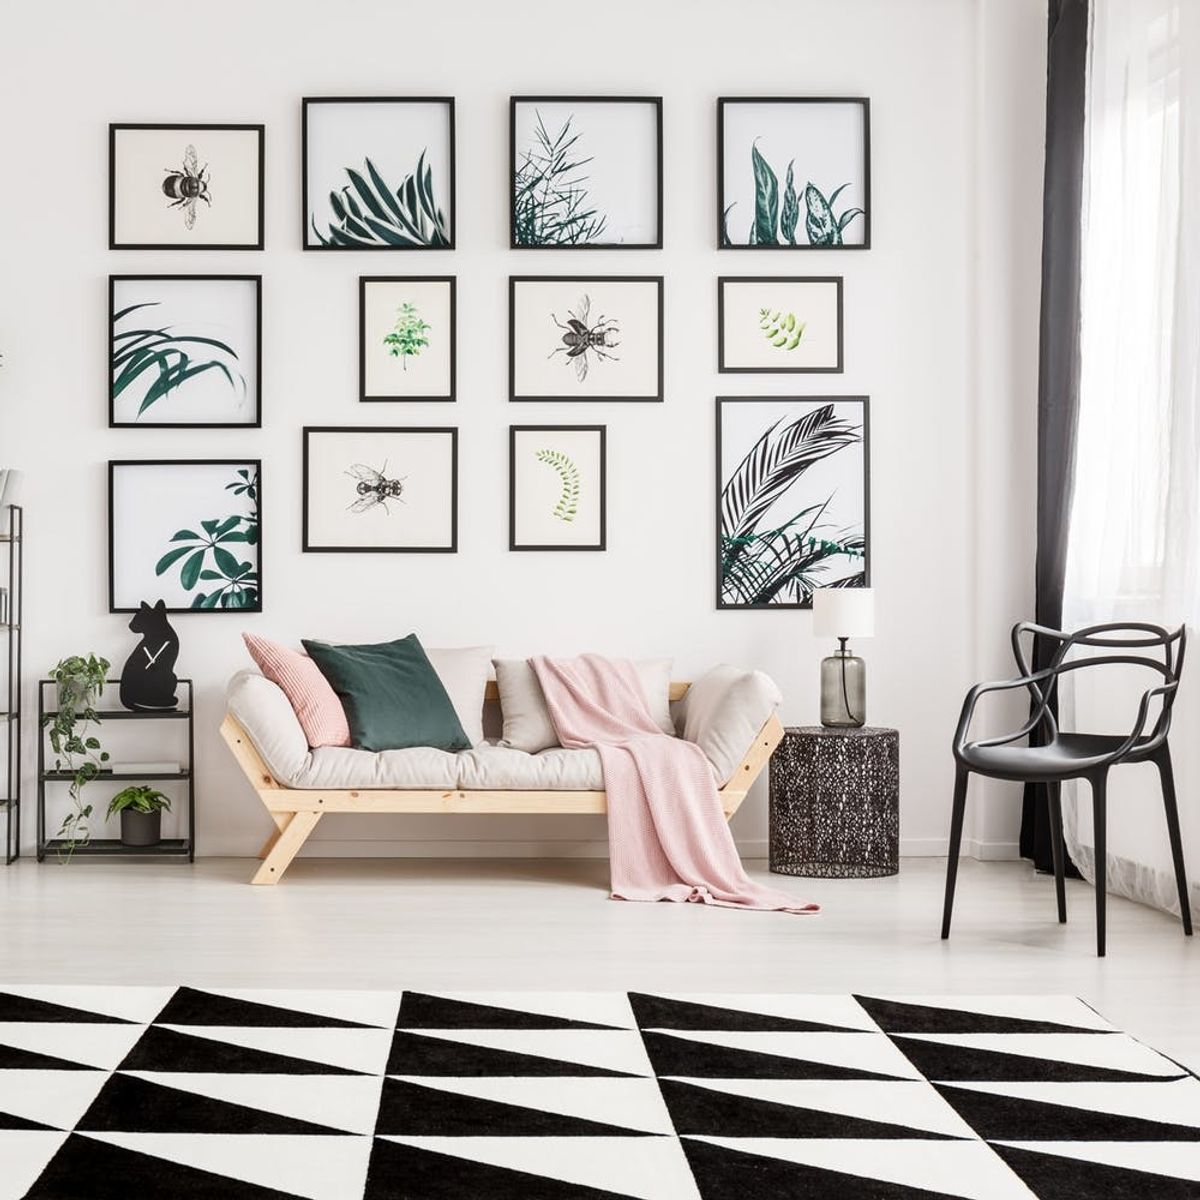 21 Ways to Hang Your Favorite Prints and Photos